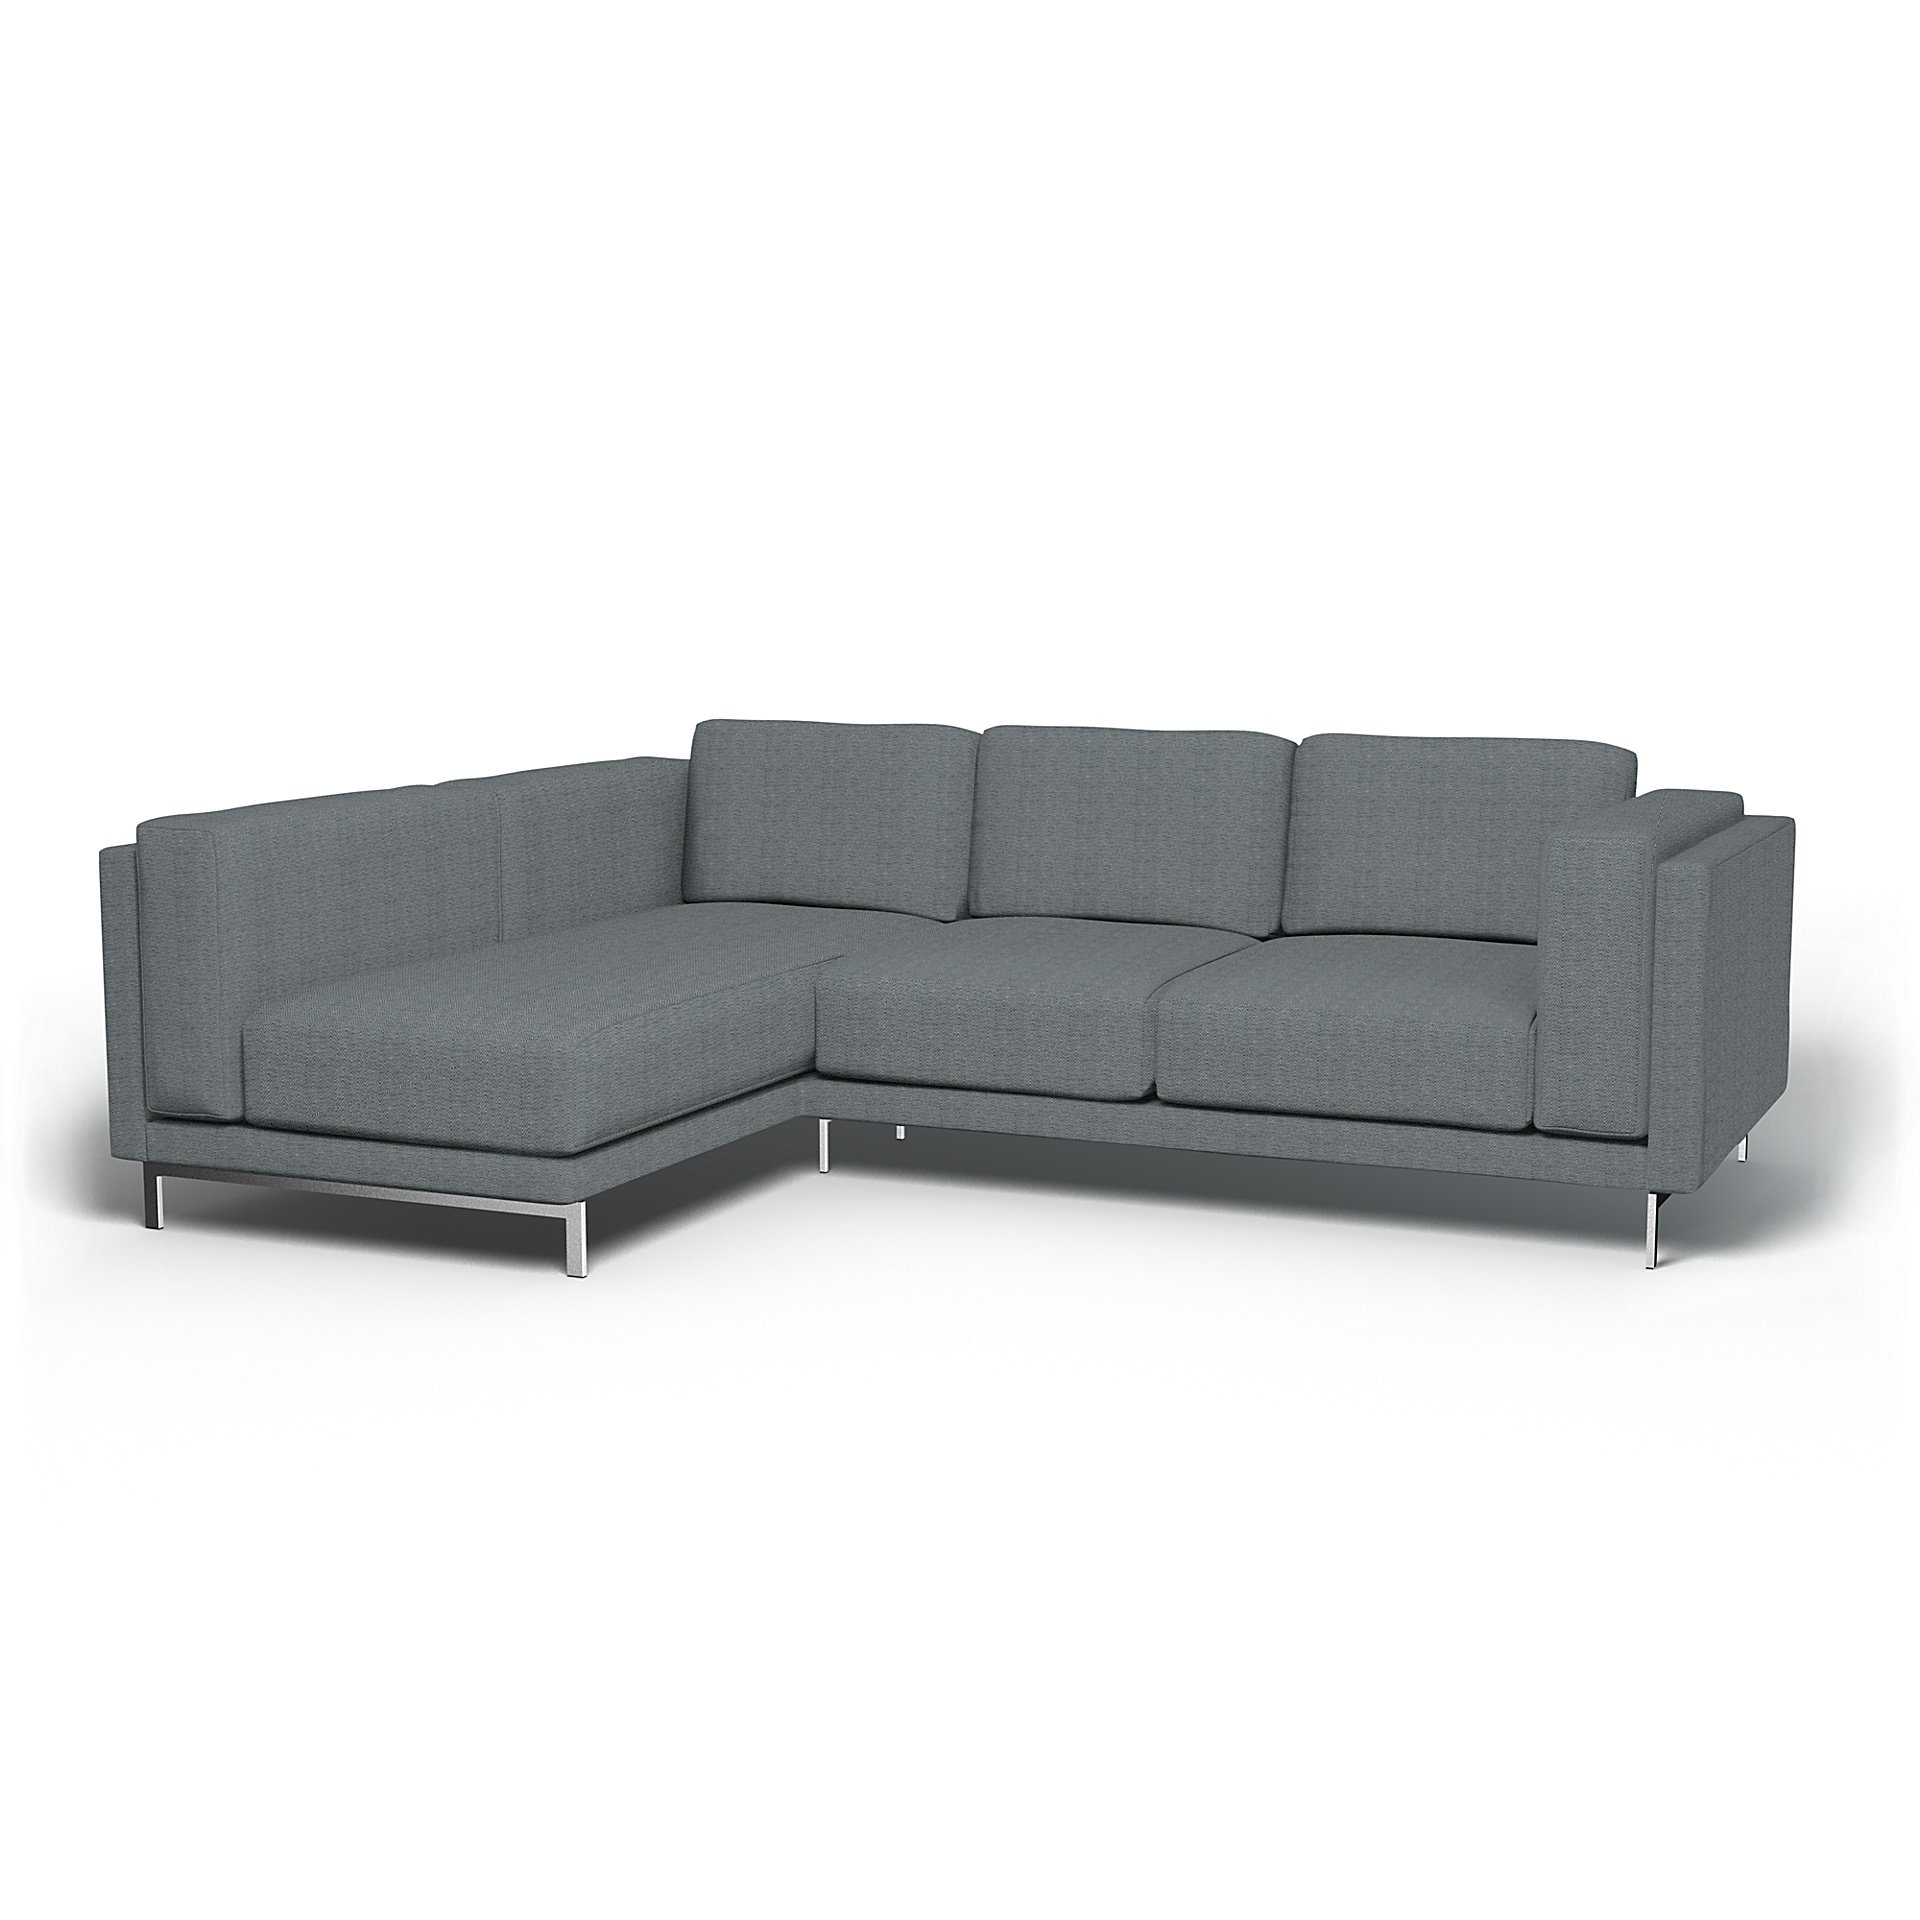 IKEA - Nockeby 3 Seater Sofa with Left Chaise Cover, Denim, Cotton - Bemz